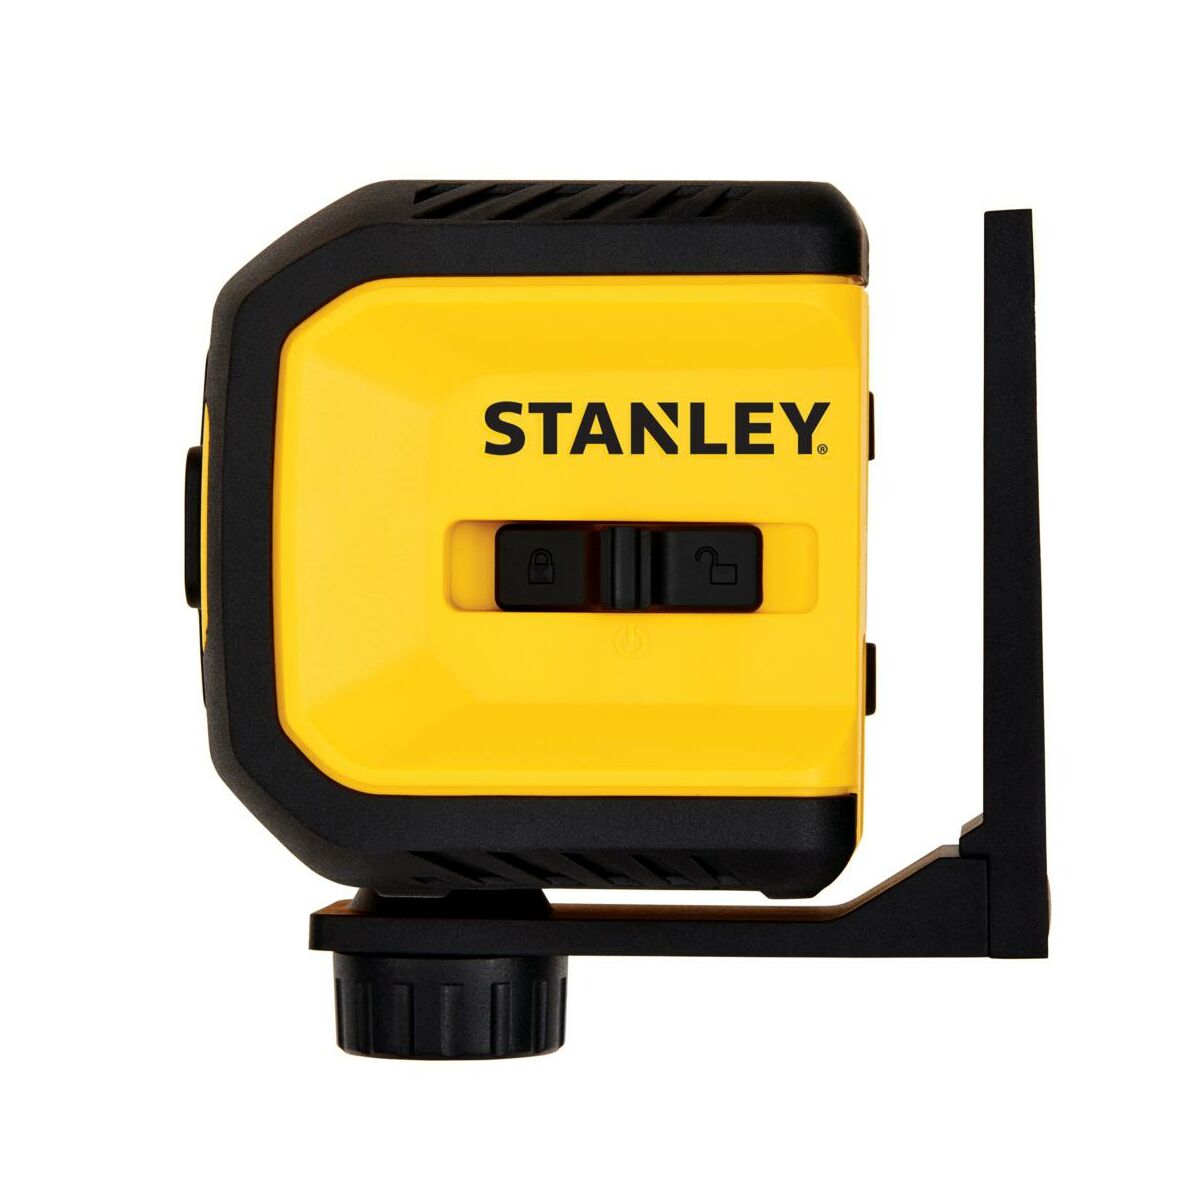 Laser krzyżowy C-Line STHT77611-0 10 m Stanley